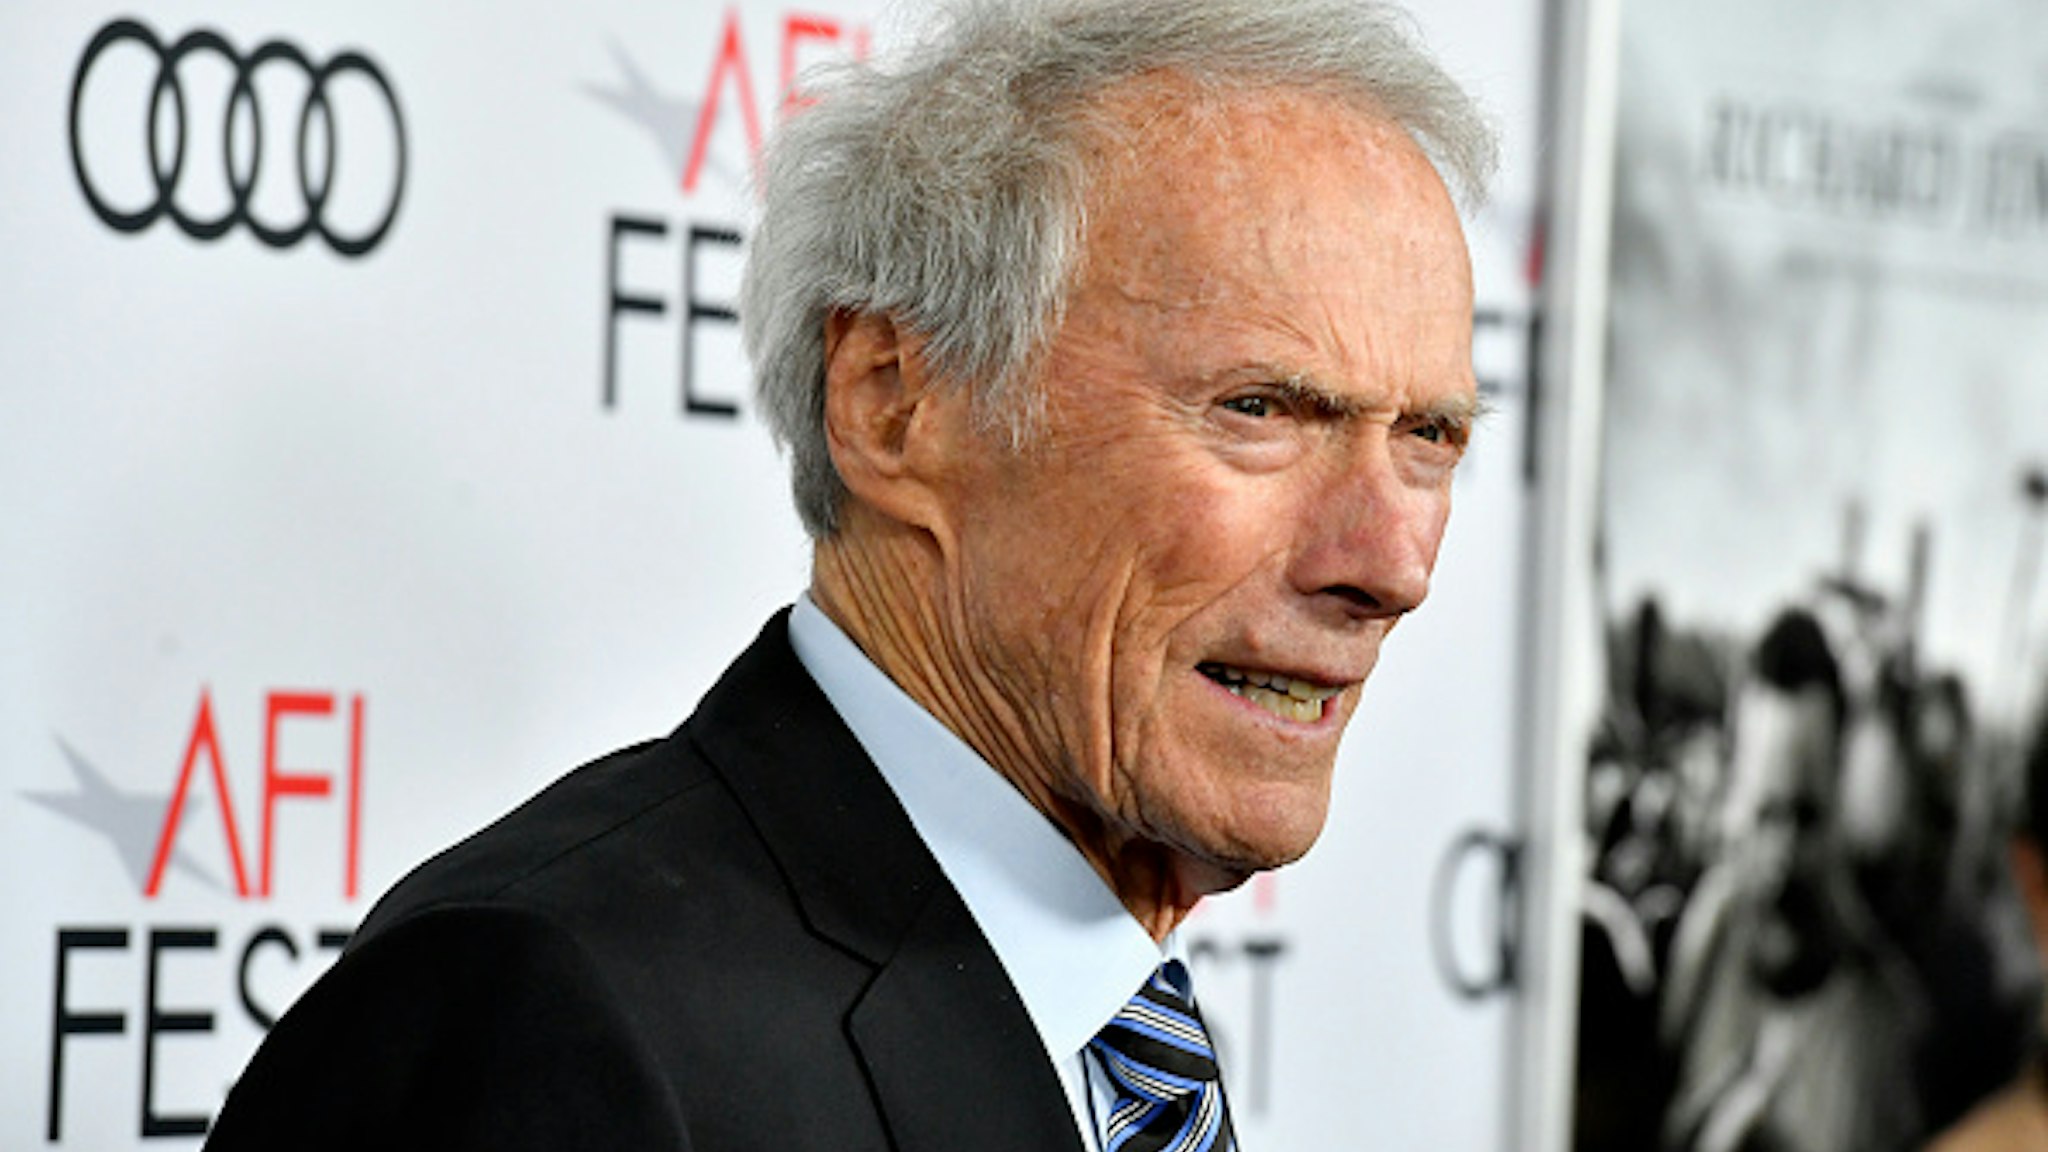 HOLLYWOOD, CALIFORNIA - NOVEMBER 20: Clint Eastwood attends the AFI FEST 2019 Presented By Audi – "Richard Jewell" Premiere at TCL Chinese Theatre on November 20, 2019 in Hollywood, California.